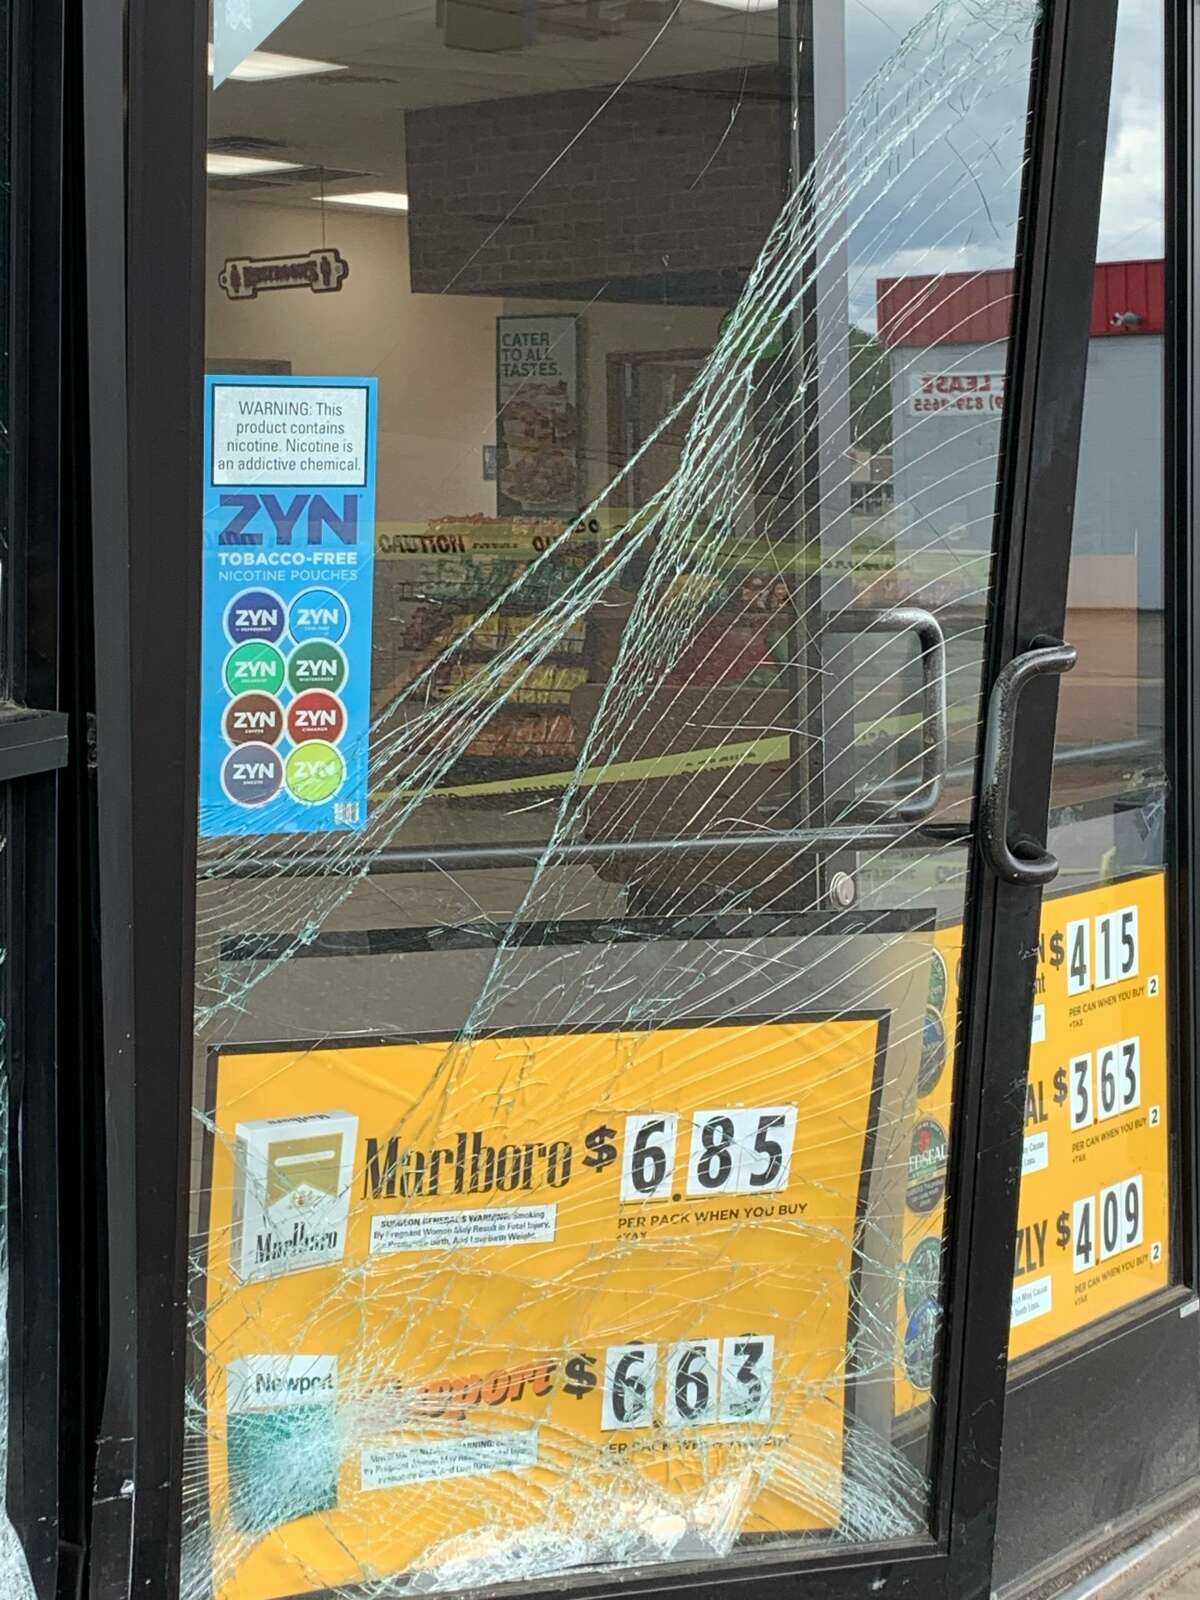 The Marathon/Next Door Food Store located at 3520 Isabella Street was heavily damaged when a car crashed through the building's front doors Wednesday morning, June 24, 2020.